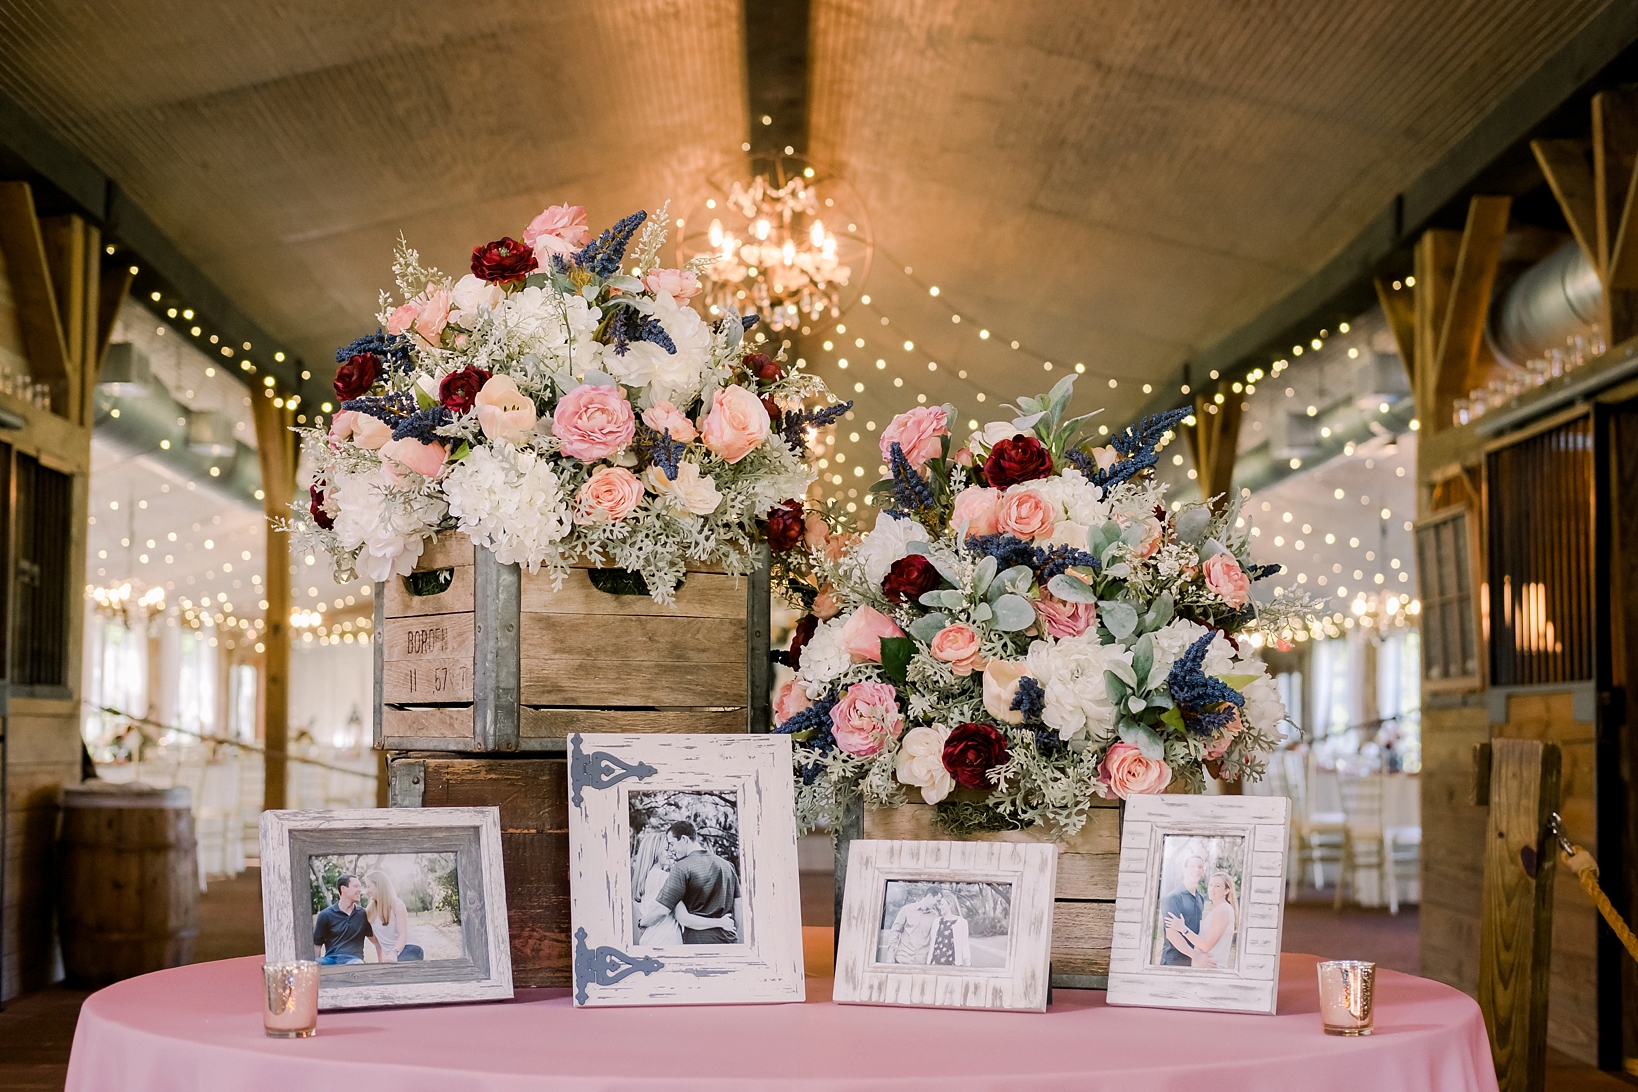 The welcome tale inside the barn at Cross Creek Ranch filled with engagement photos by Sarah and Ben